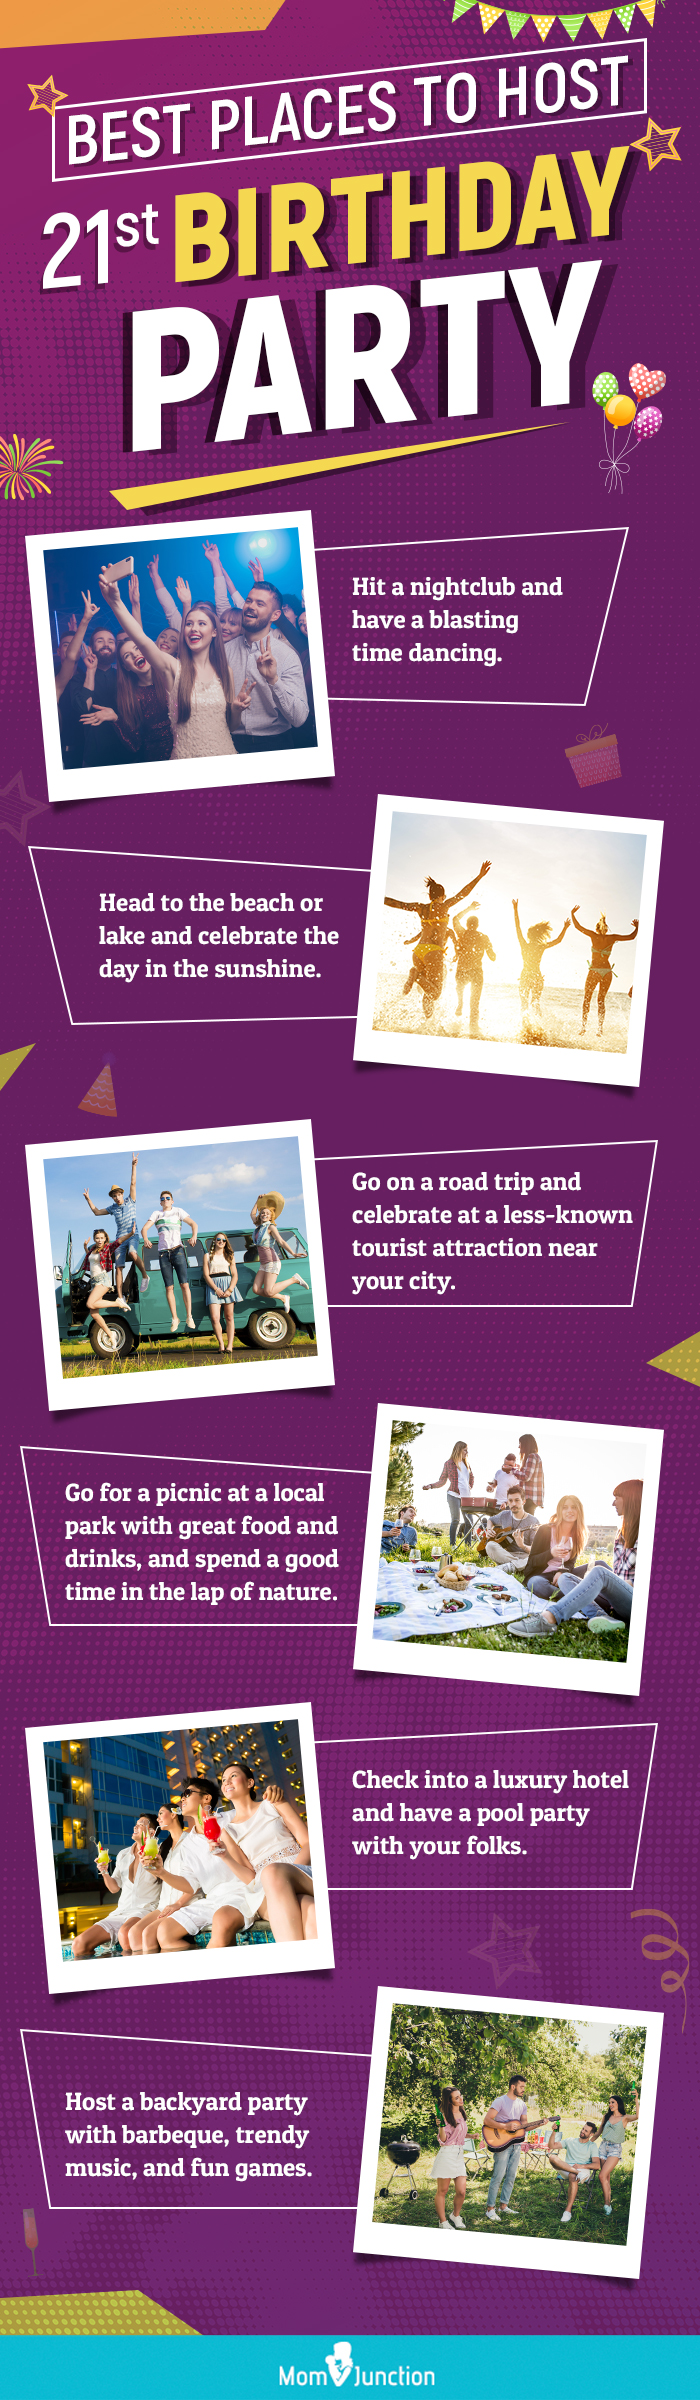 best places to host 21st birthday party [infographic]